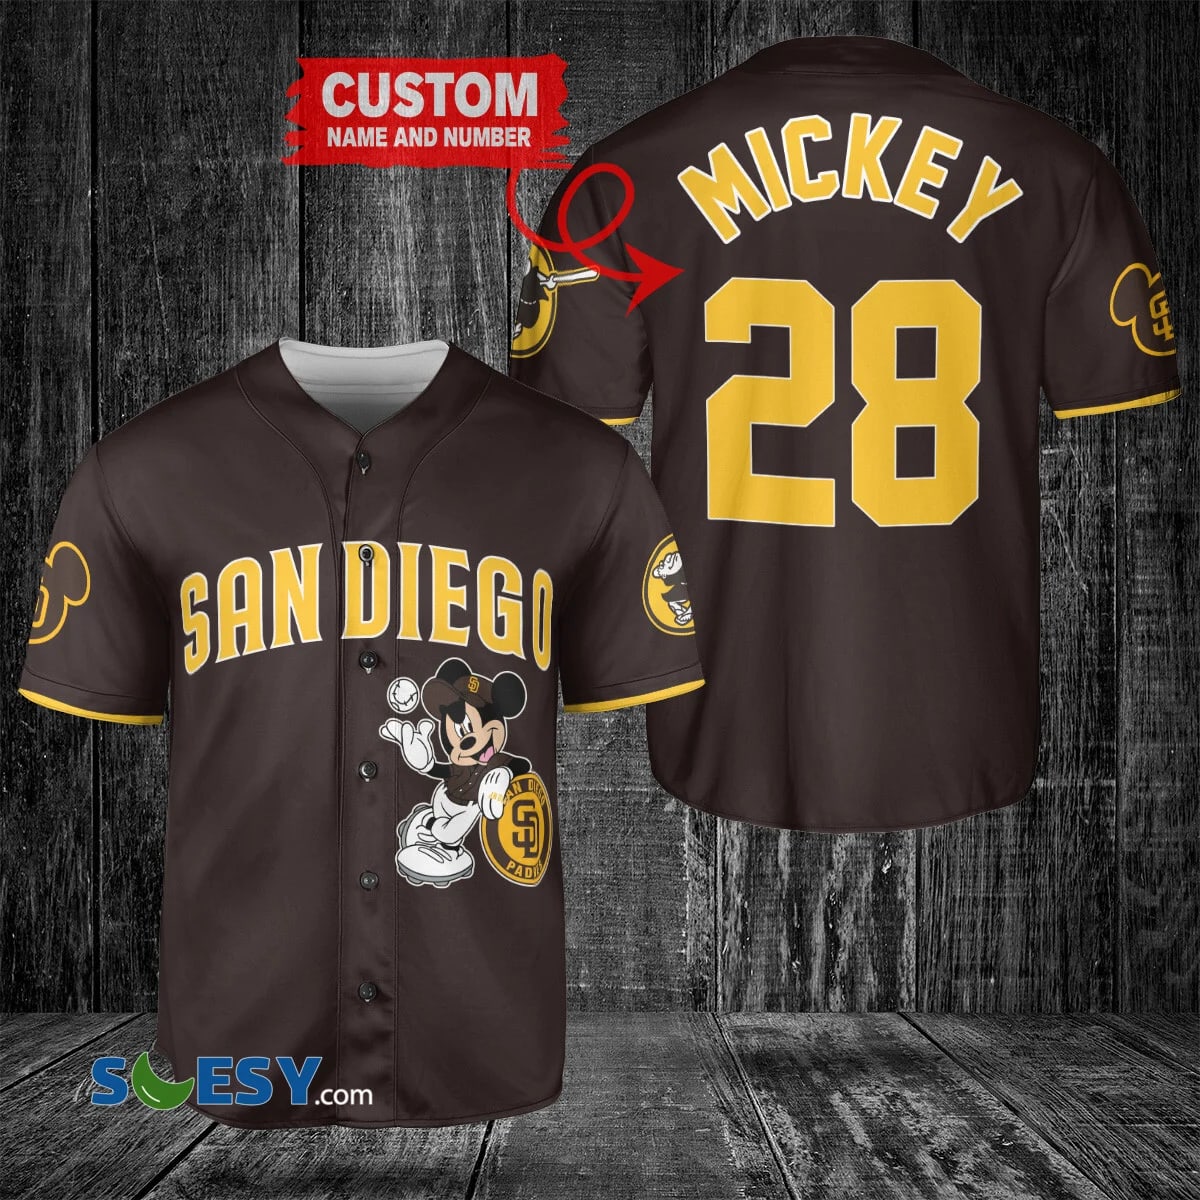 San Diego Padres Mickey Mouse X San Diego Padres Baseball Jersey Wpyb35